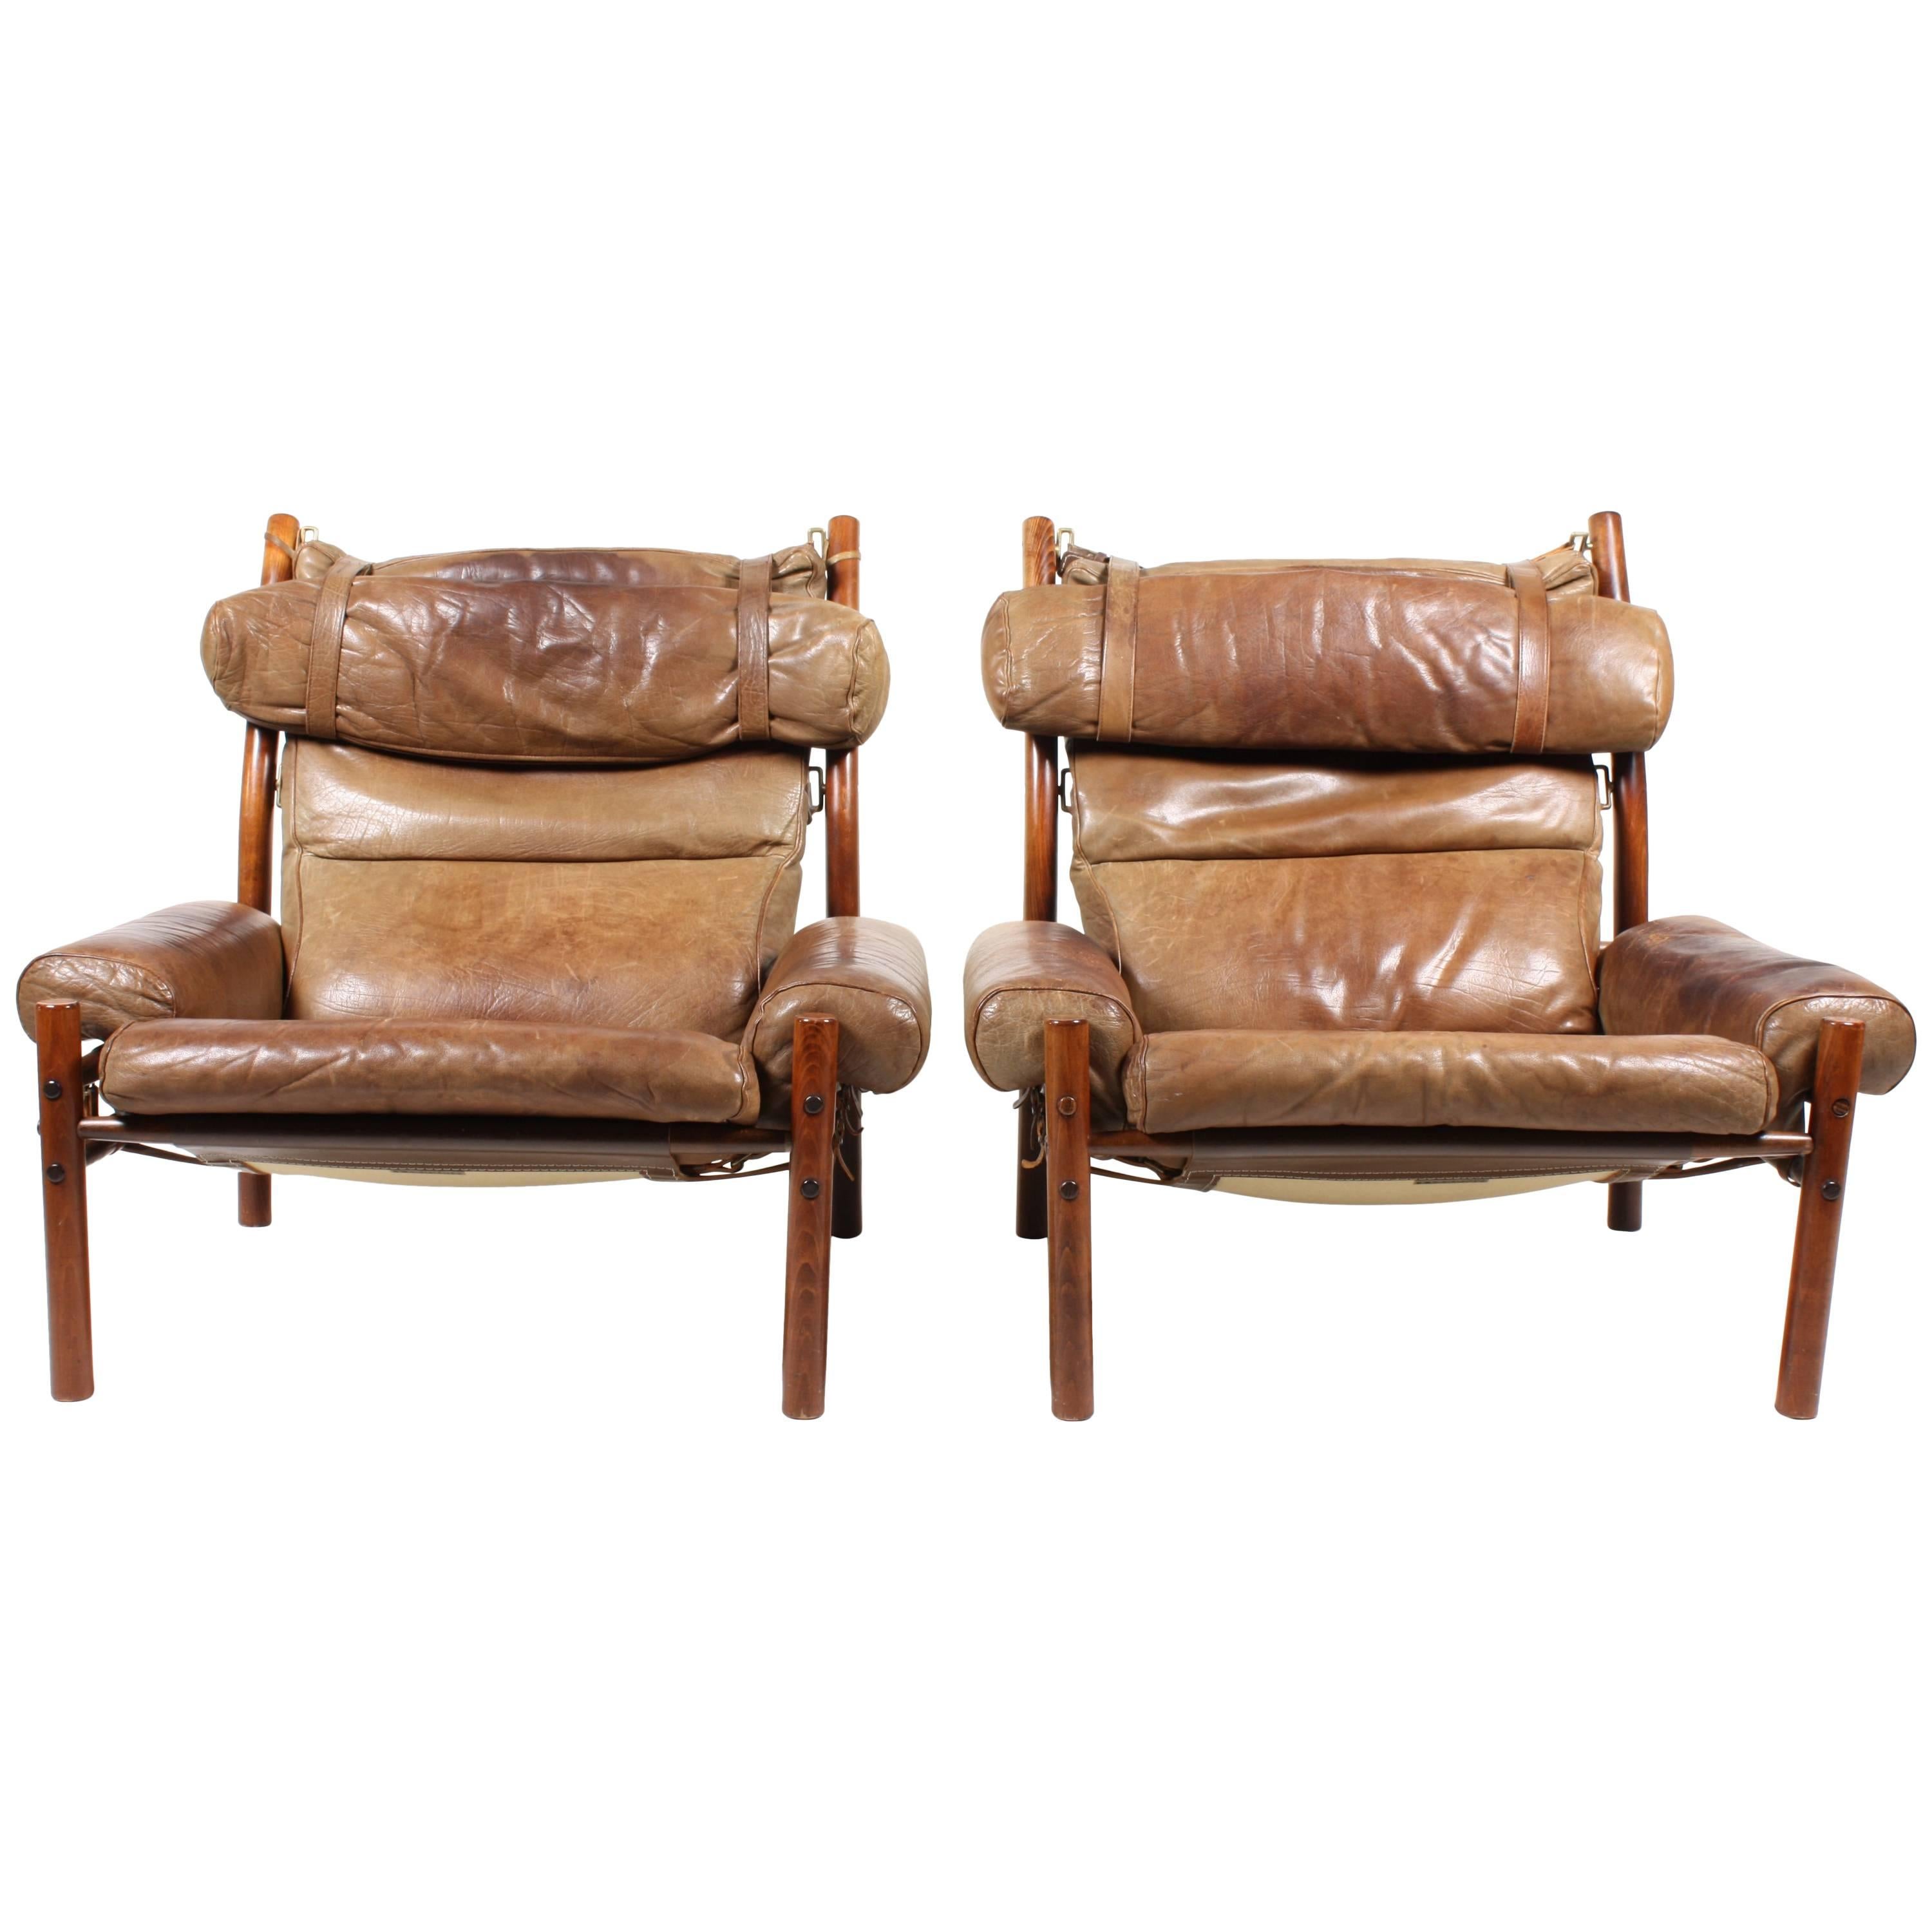 Pair of Inca Lounge Chairs by Norell